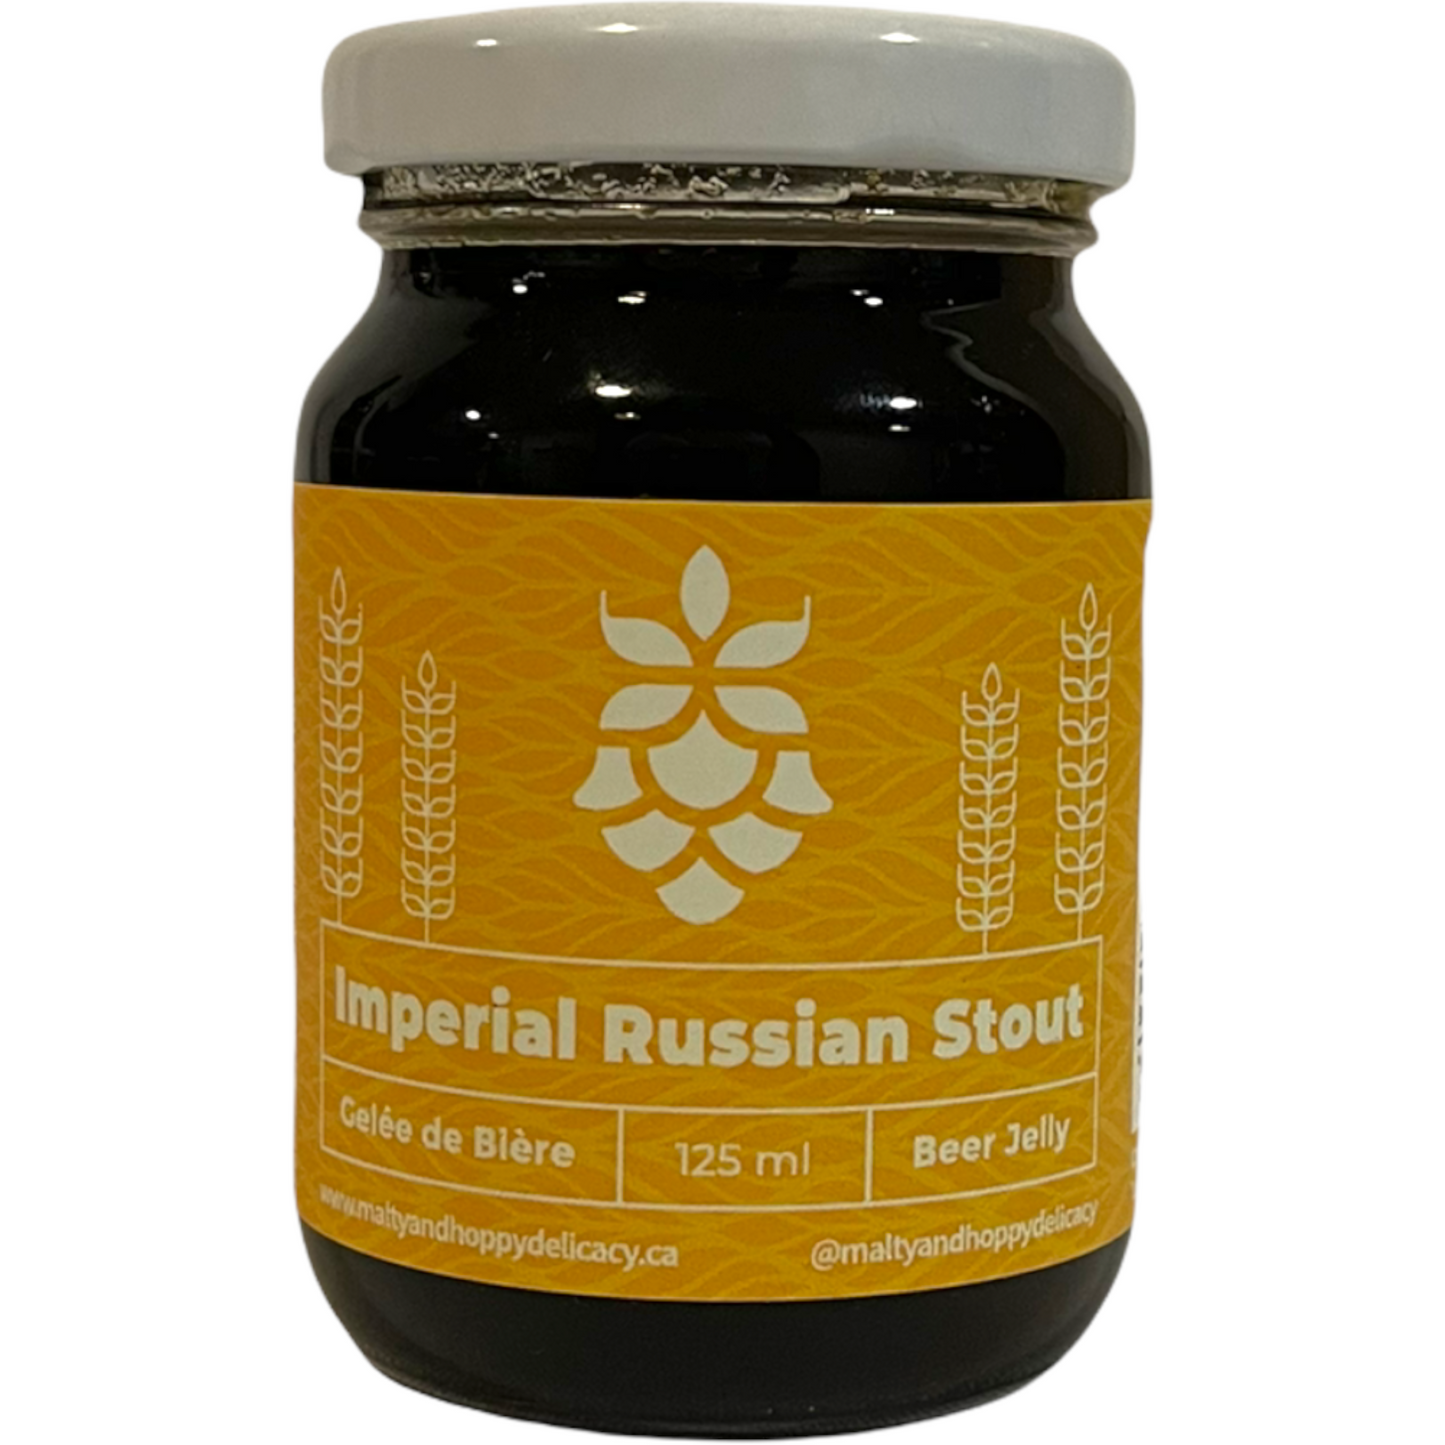 MALTY and HOPPY IMPERIAL RUSSIAN STOUT BEER JELLY